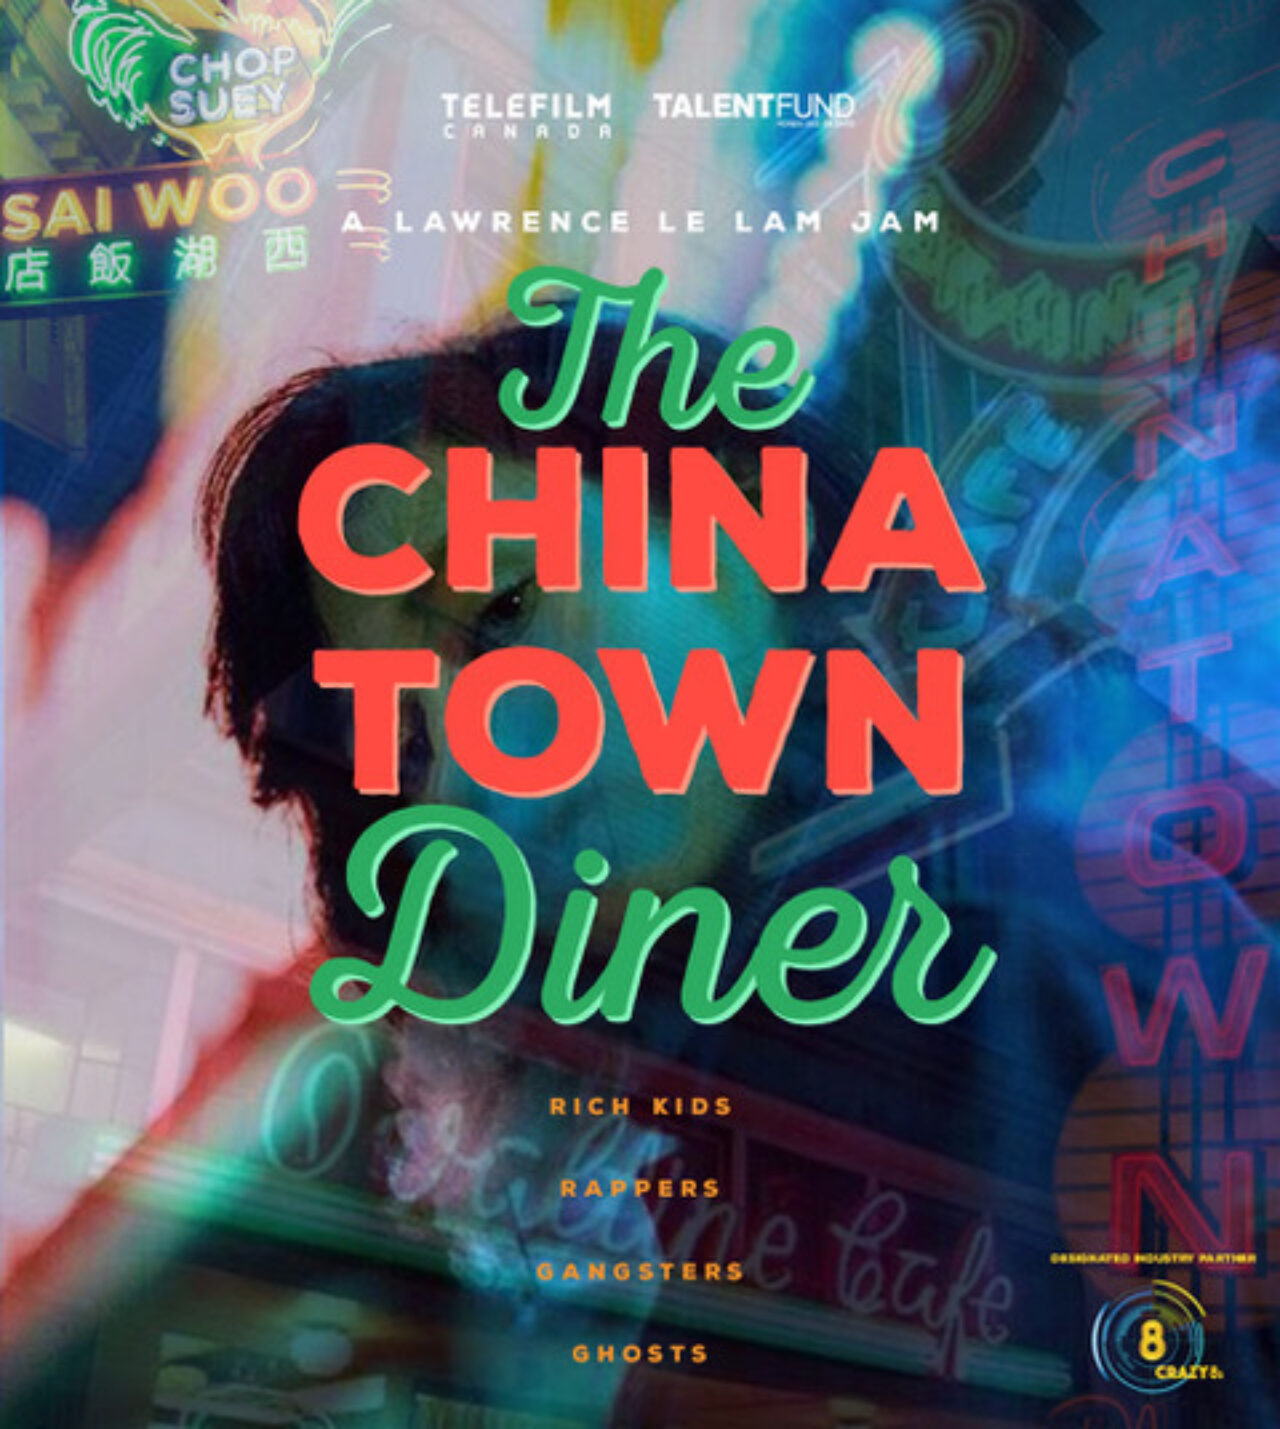 The Chinatown Diner Mock Poster